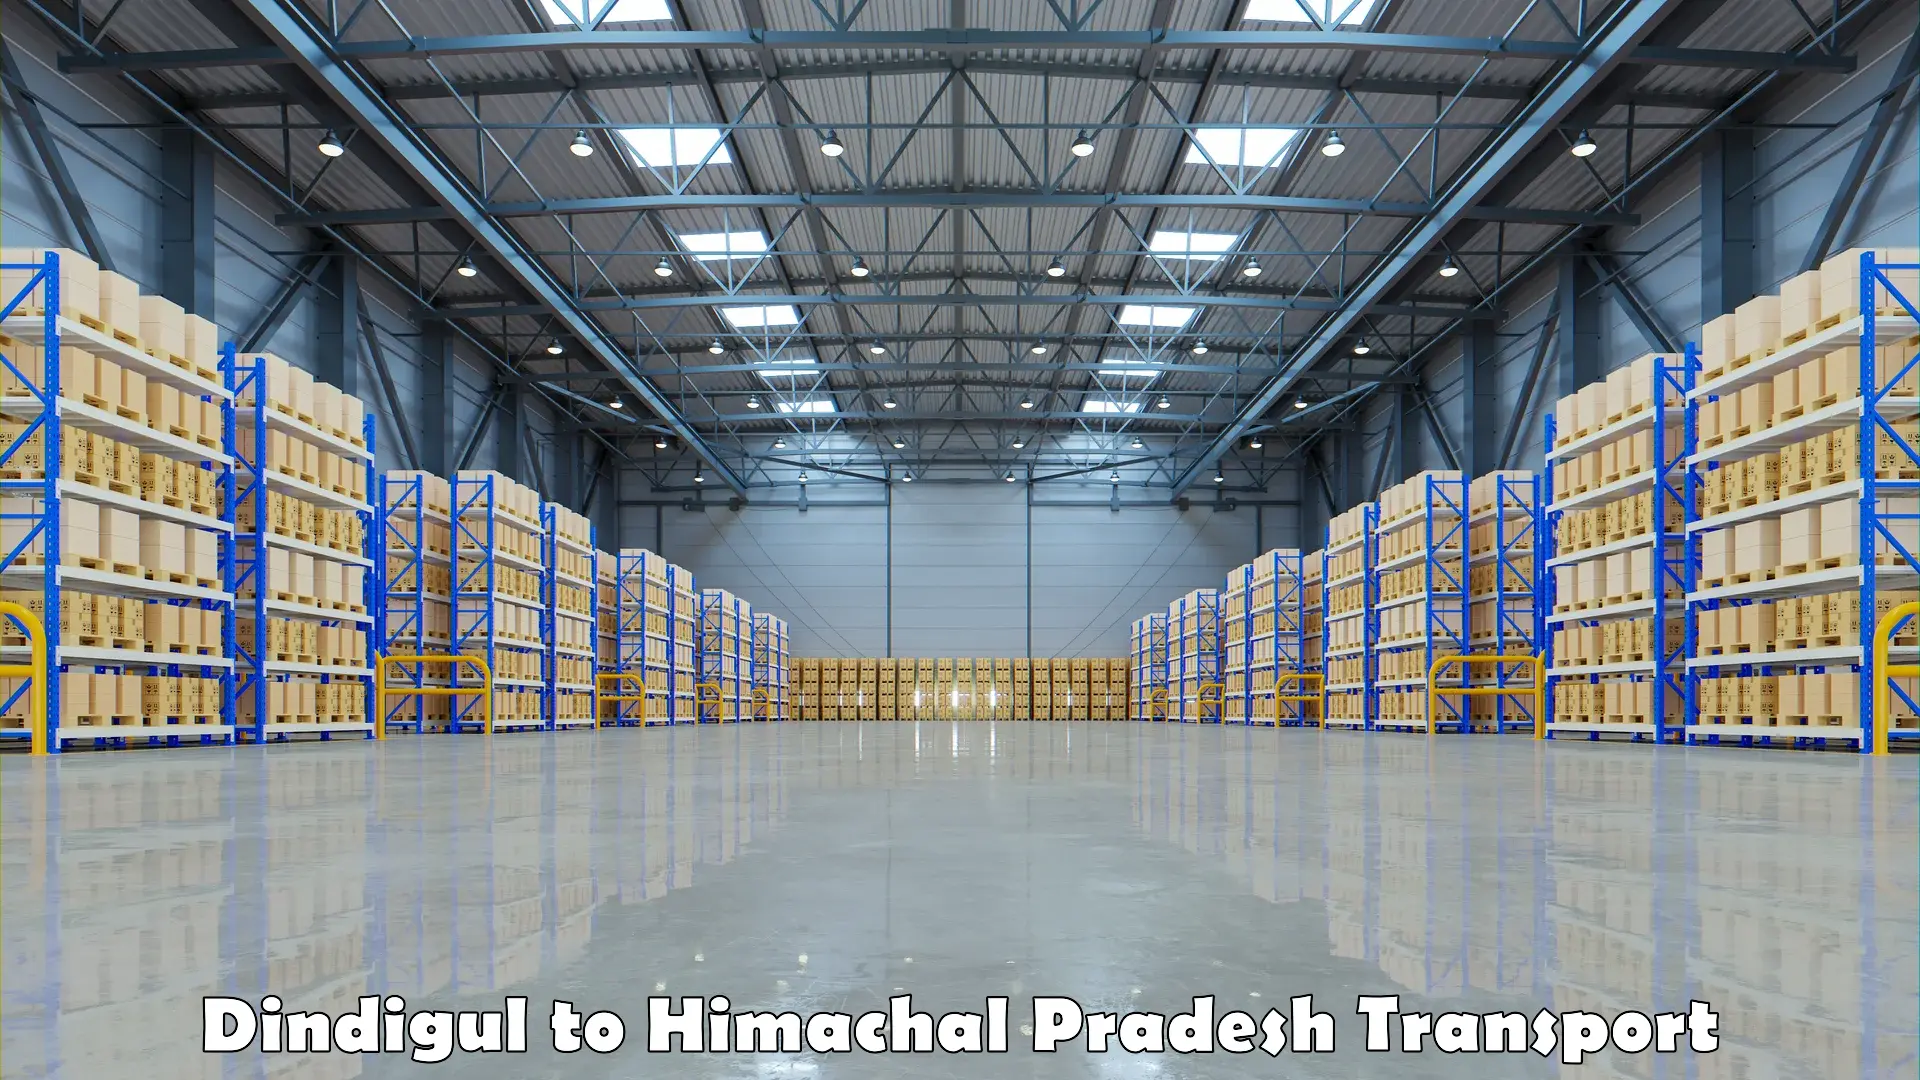 Air freight transport services Dindigul to Kotkhai